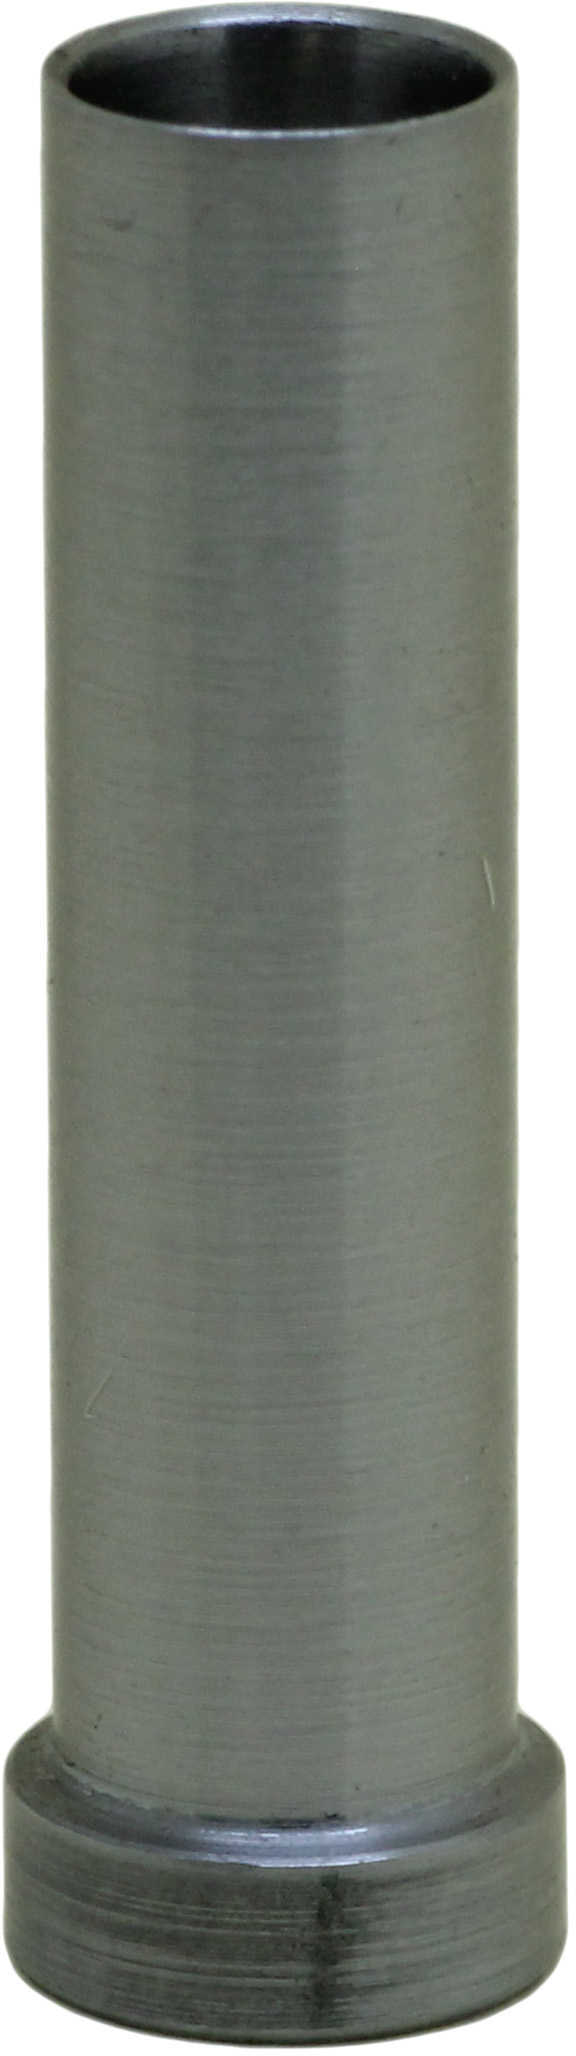 Hornady 397133 Bullet Seating Stems 308 Win